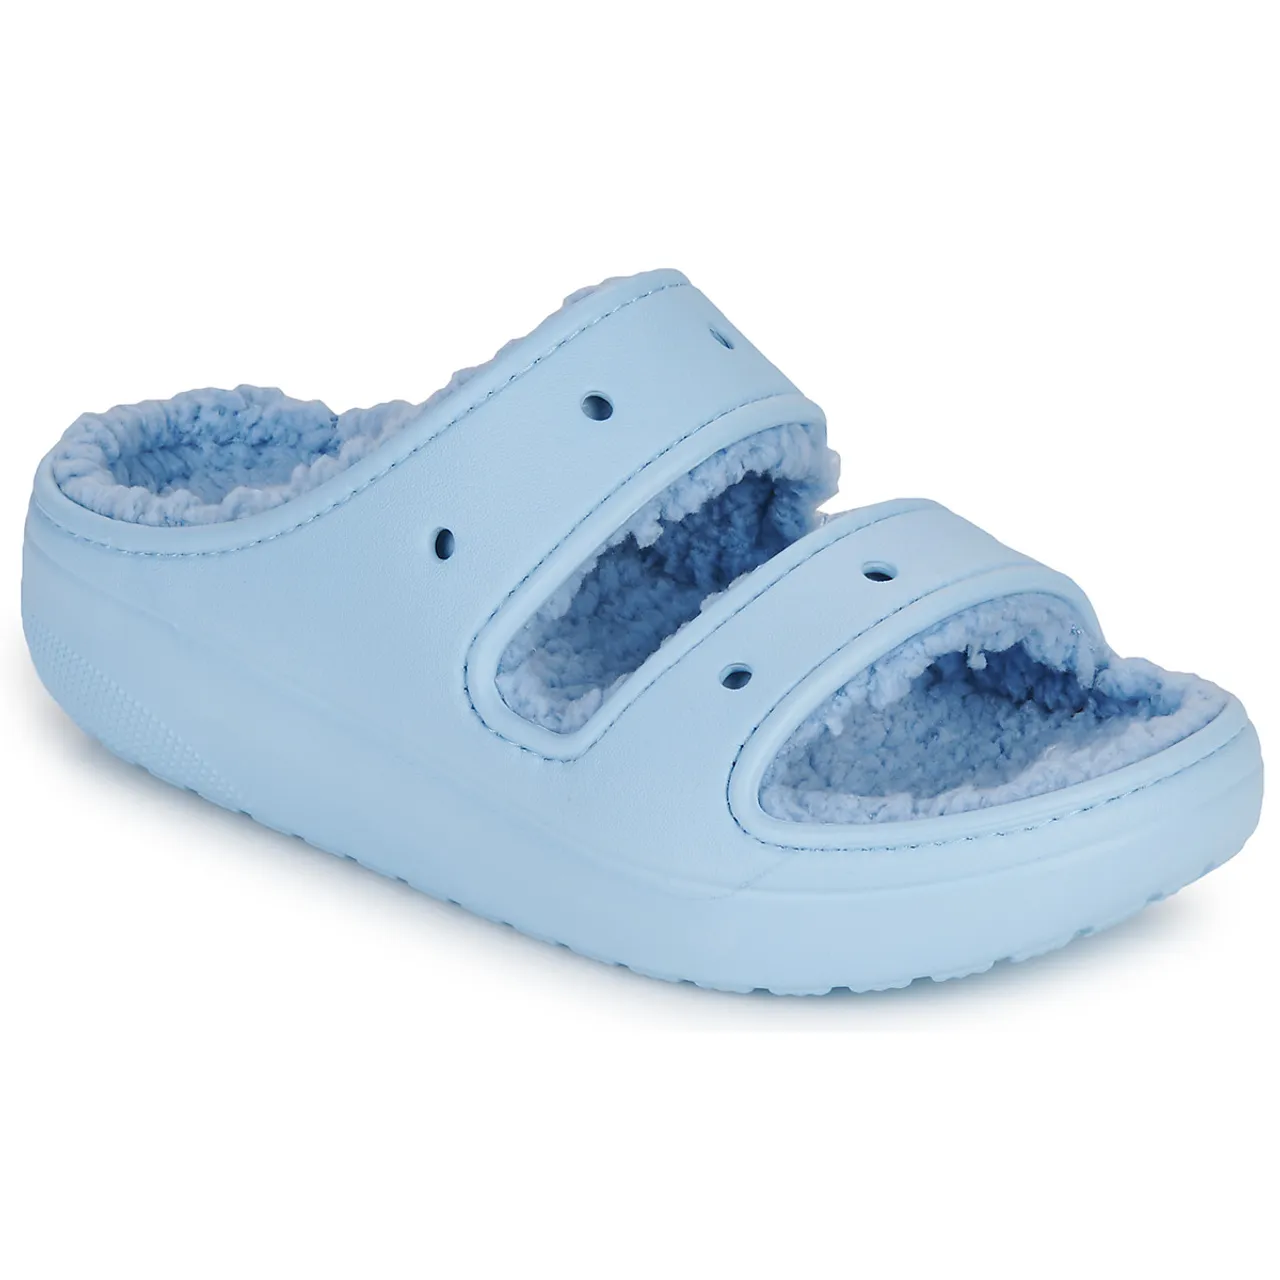 Crocs  Classic Cozzzy Sandal  women's Mules / Casual Shoes in Blue